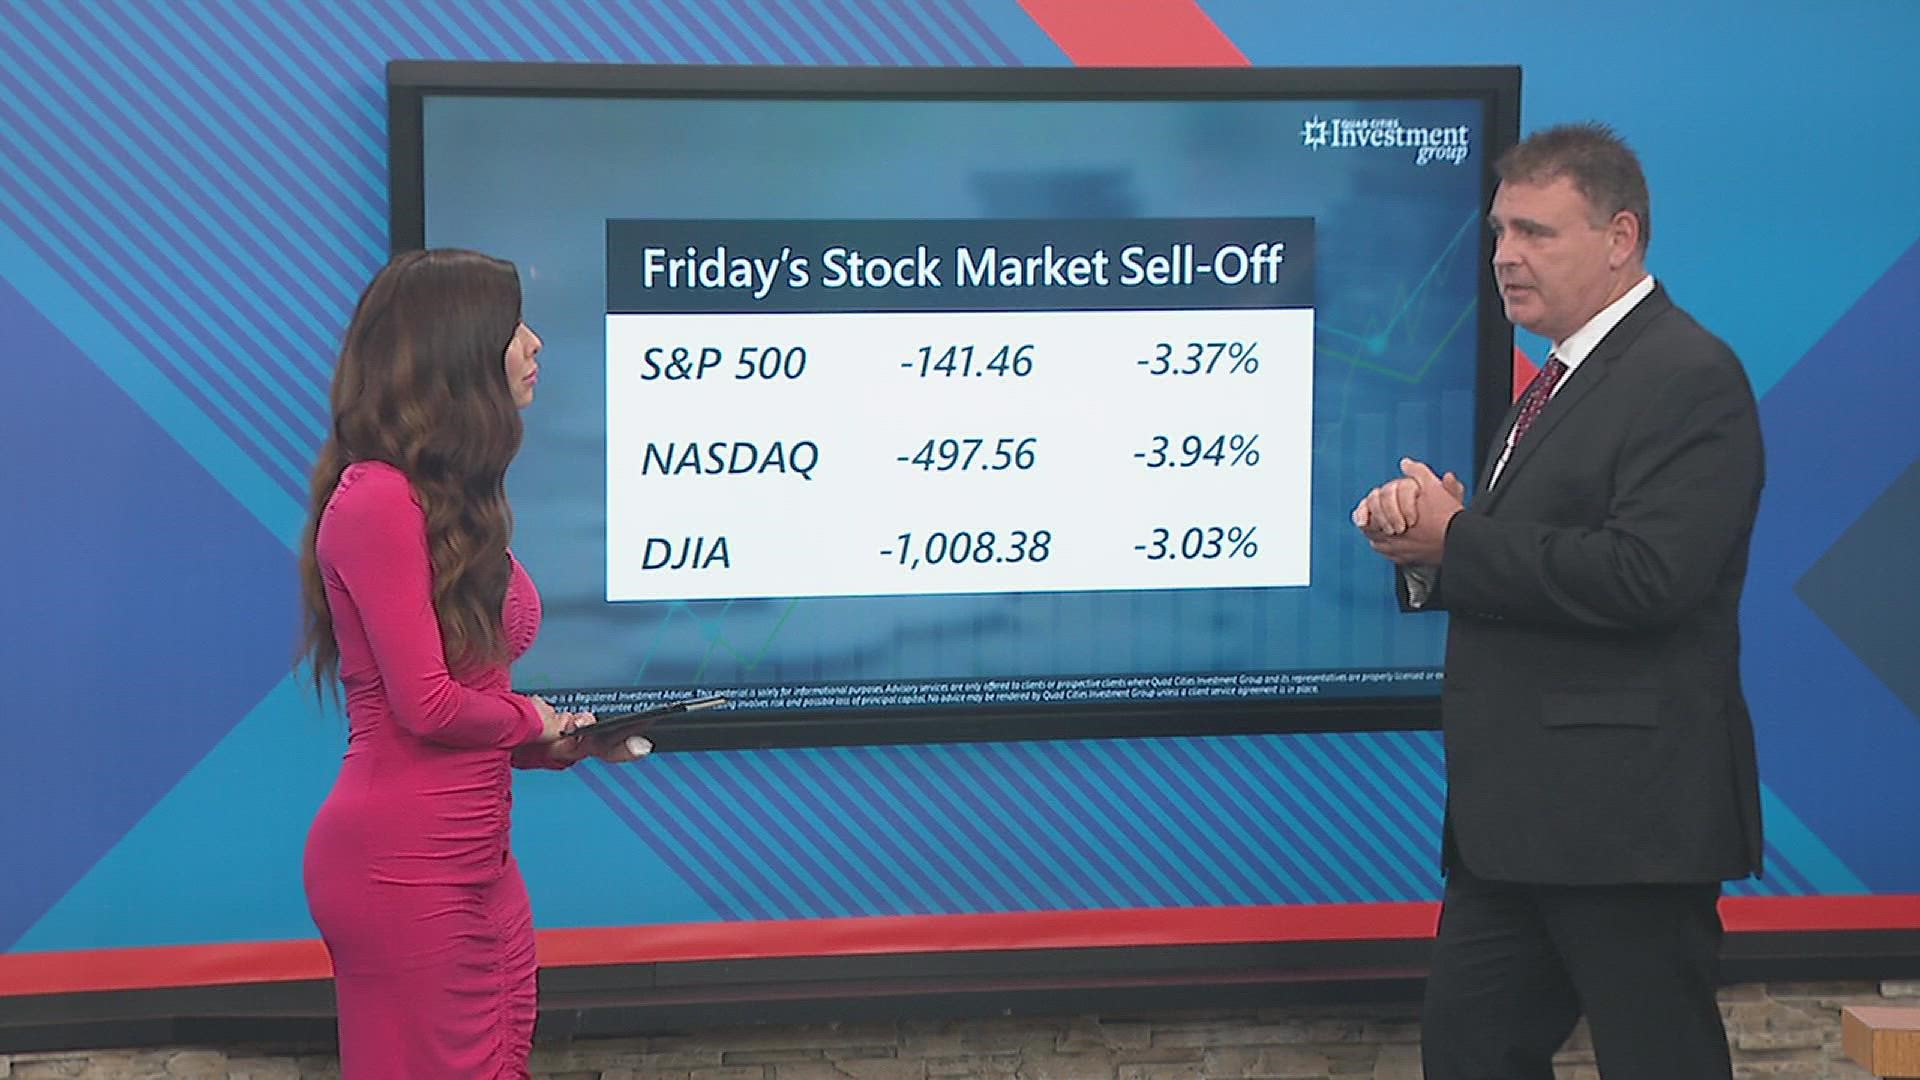 Mark Grywacheski with Quad Cities Investment Group breaks down last Friday's stock market sell-off and says the Fed's top priority is to get inflation under control.